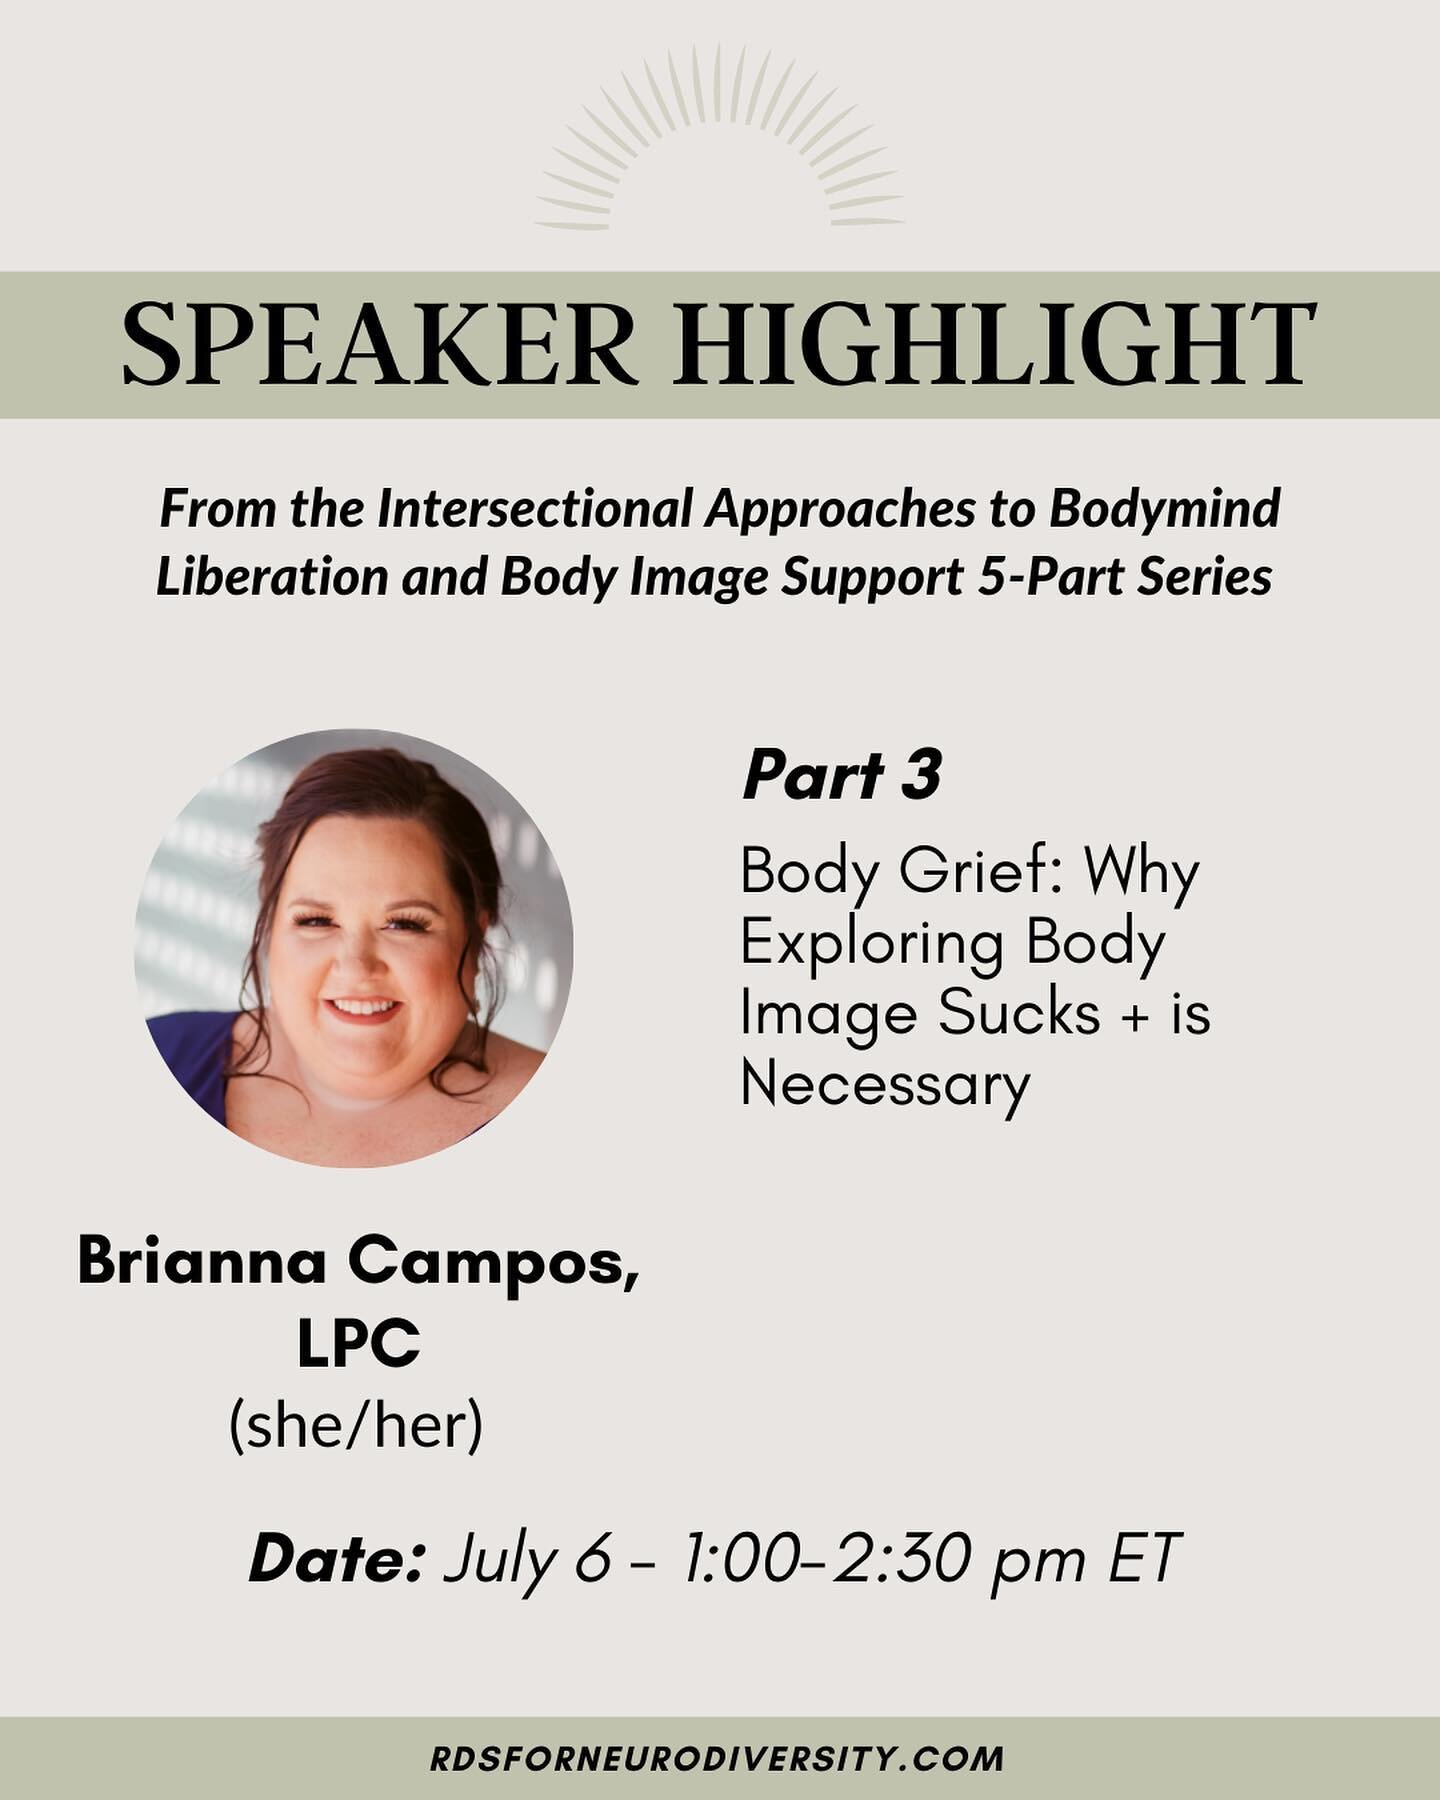 Part 3
Body Grief: Why Exploring Body Image Sucks + is Necessary⁣
⁣
Brianna Campos, LPC (she/ her) @bodyimagewithbri describes body grief as the distress associated with perceived loss around body change. When we explore body image we need to underst